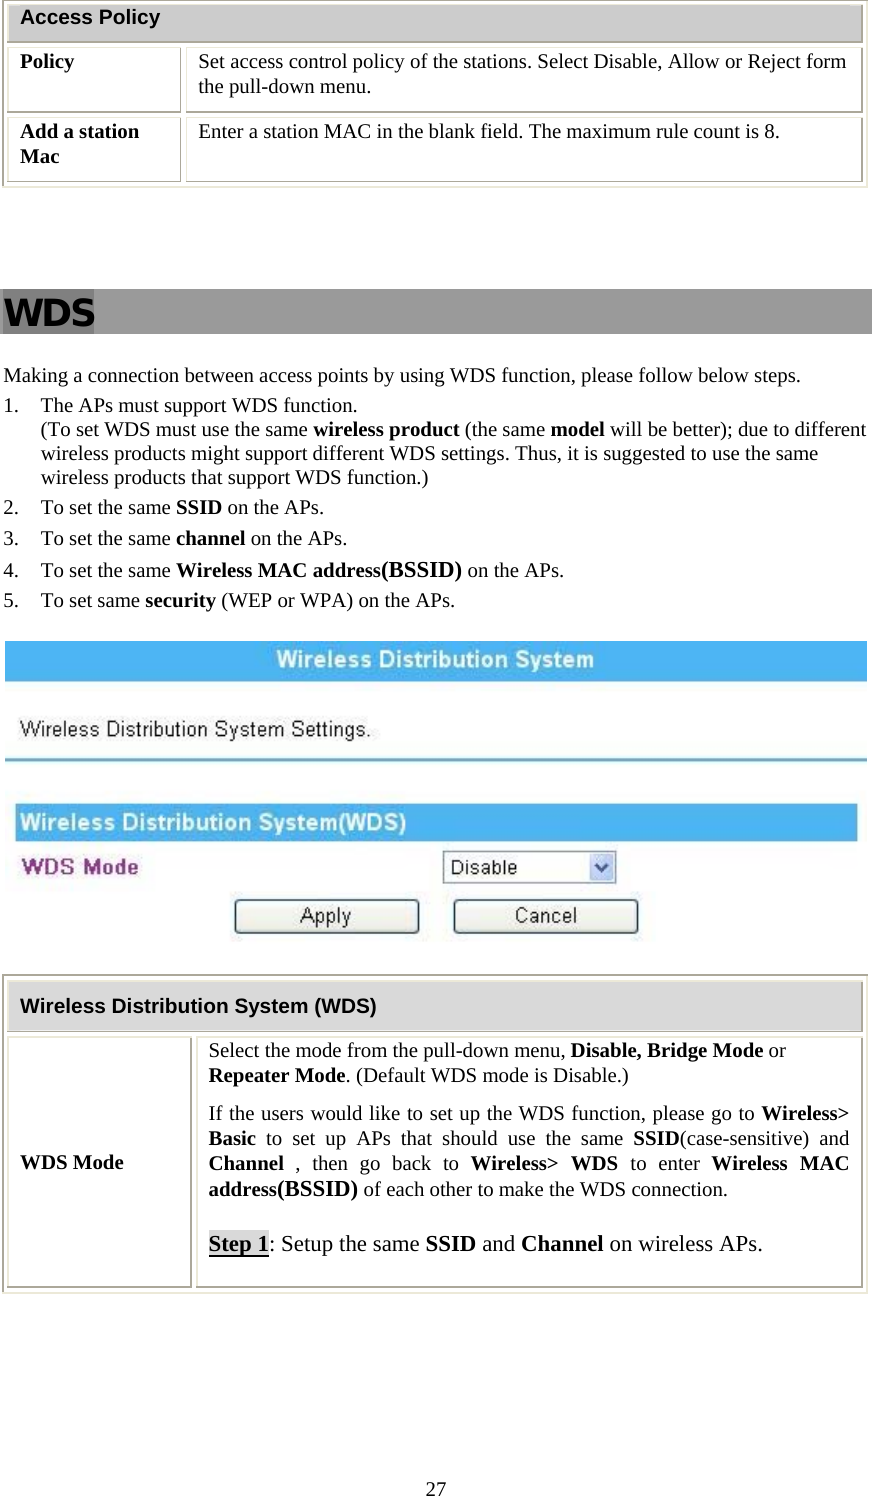   27Access Policy Policy  Set access control policy of the stations. Select Disable, Allow or Reject form the pull-down menu.  Add a station Mac  Enter a station MAC in the blank field. The maximum rule count is 8.    WDS Making a connection between access points by using WDS function, please follow below steps. 1. The APs must support WDS function.  (To set WDS must use the same wireless product (the same model will be better); due to different wireless products might support different WDS settings. Thus, it is suggested to use the same wireless products that support WDS function.) 2. To set the same SSID on the APs. 3. To set the same channel on the APs. 4. To set the same Wireless MAC address(BSSID) on the APs. 5. To set same security (WEP or WPA) on the APs.  Wireless Distribution System (WDS) WDS Mode Select the mode from the pull-down menu, Disable, Bridge Mode or Repeater Mode. (Default WDS mode is Disable.) If the users would like to set up the WDS function, please go to Wireless&gt; Basic to set up APs that should use the same SSID(case-sensitive) and Channel , then go back to Wireless&gt; WDS to enter Wireless MAC address(BSSID) of each other to make the WDS connection.  Step 1: Setup the same SSID and Channel on wireless APs. 